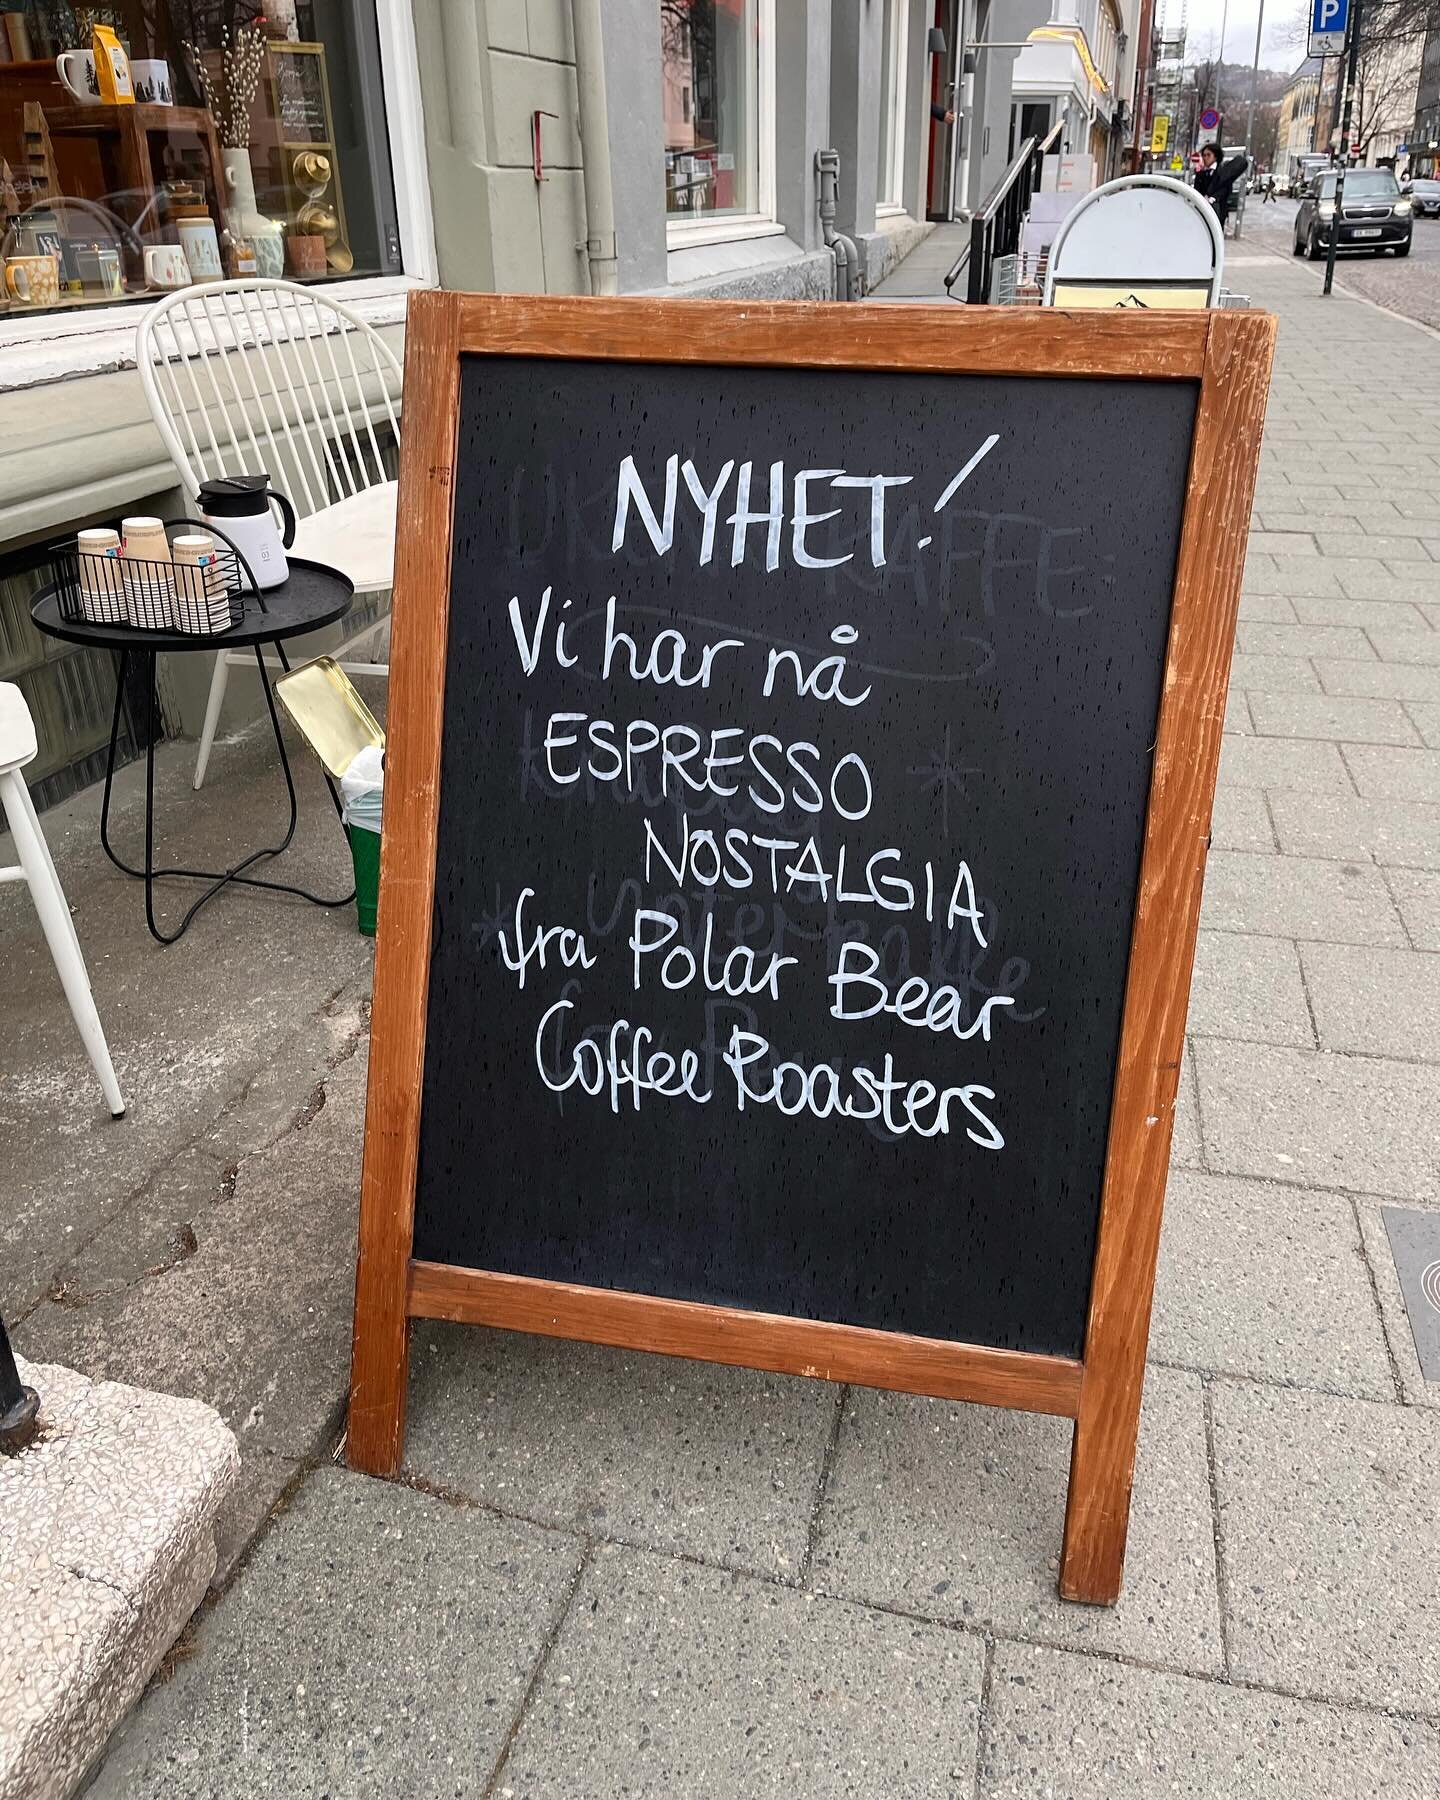 &hellip;.you can now find #polarbearcoffeeroasters coffee at @teogkaffehuset - they have all of the popular coffees (espresso and filter) that you used to get @cafelefrere &hellip;. #specialtycoffee #trondheim #supportlocal #coffee